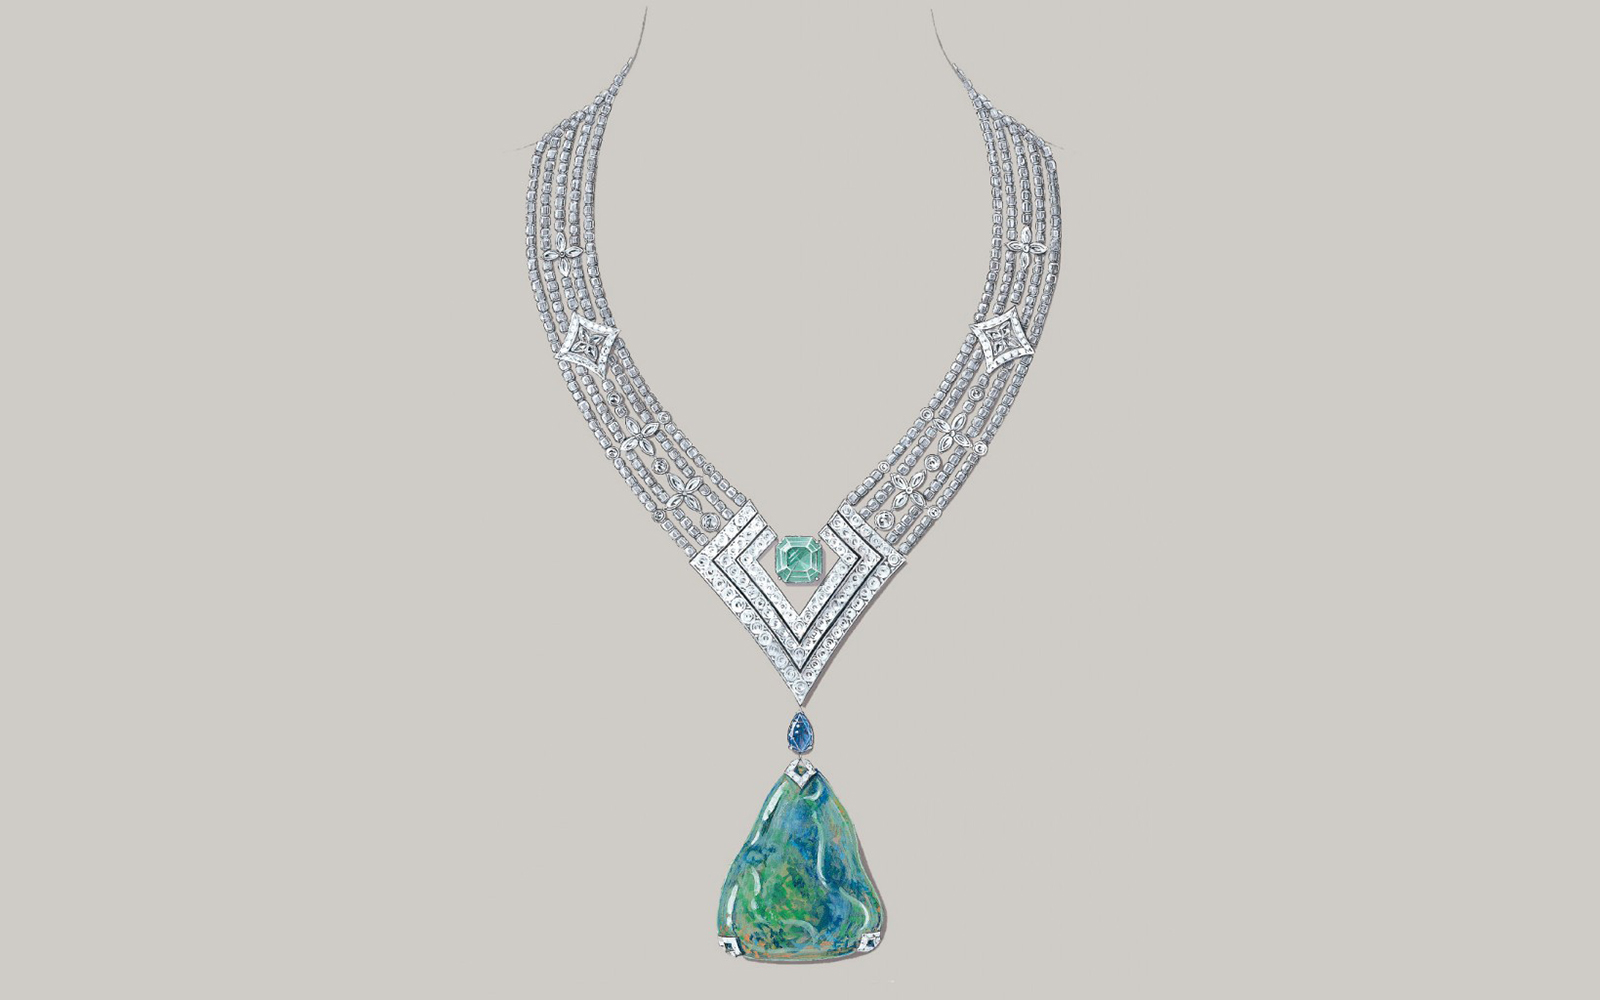 The new Acte V high jewellery collection by Louis Vuitton